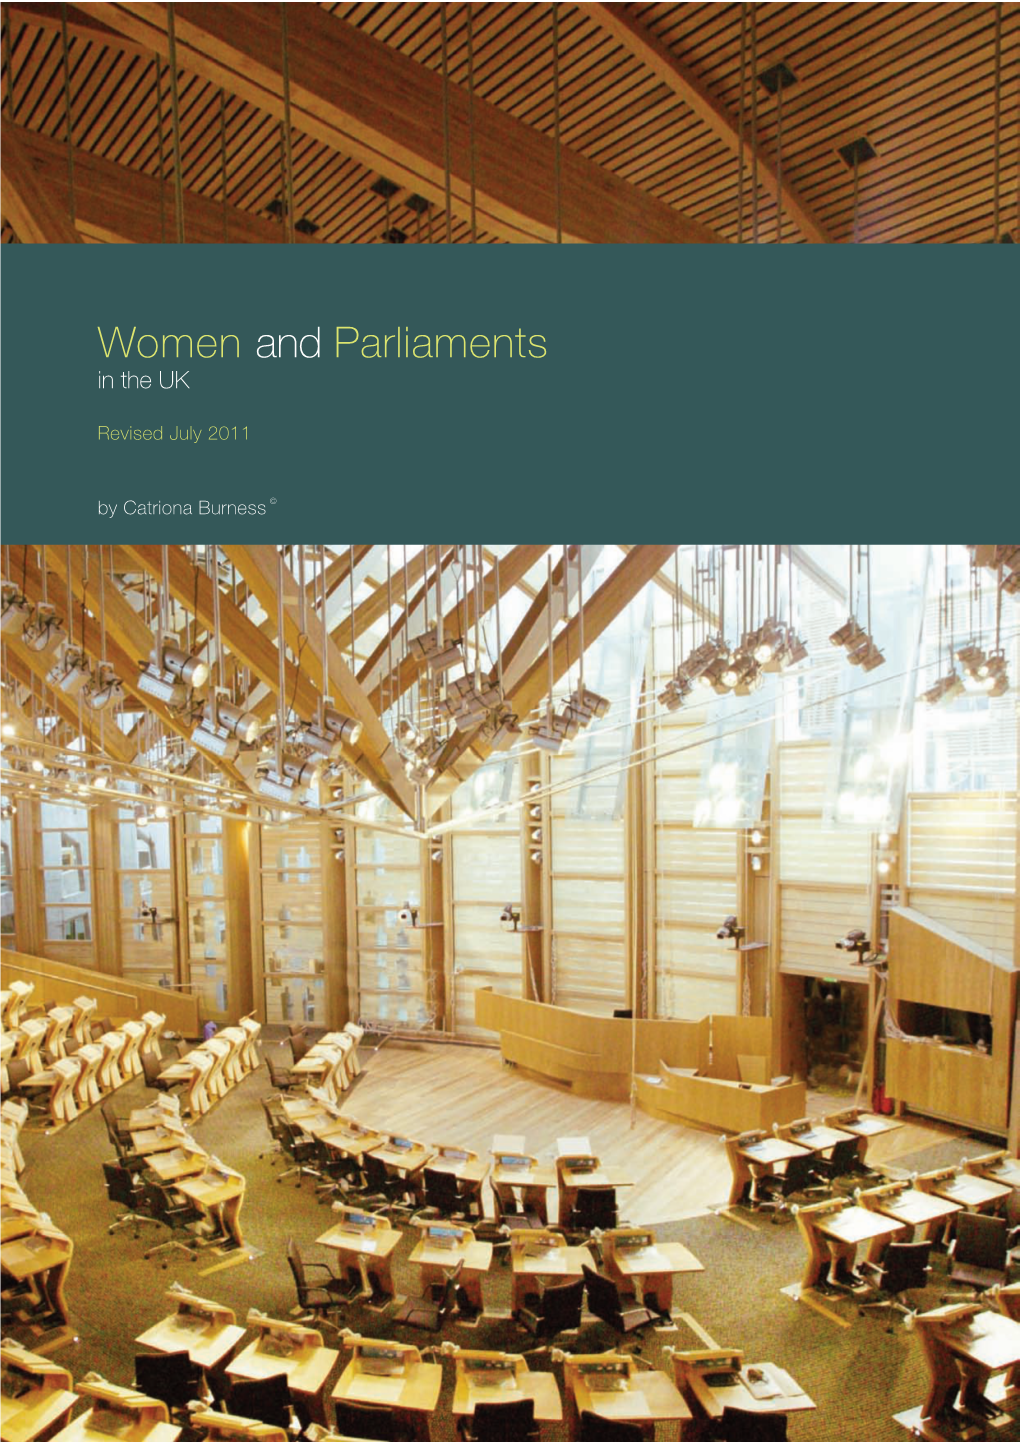 Women and Parliaments in the UK